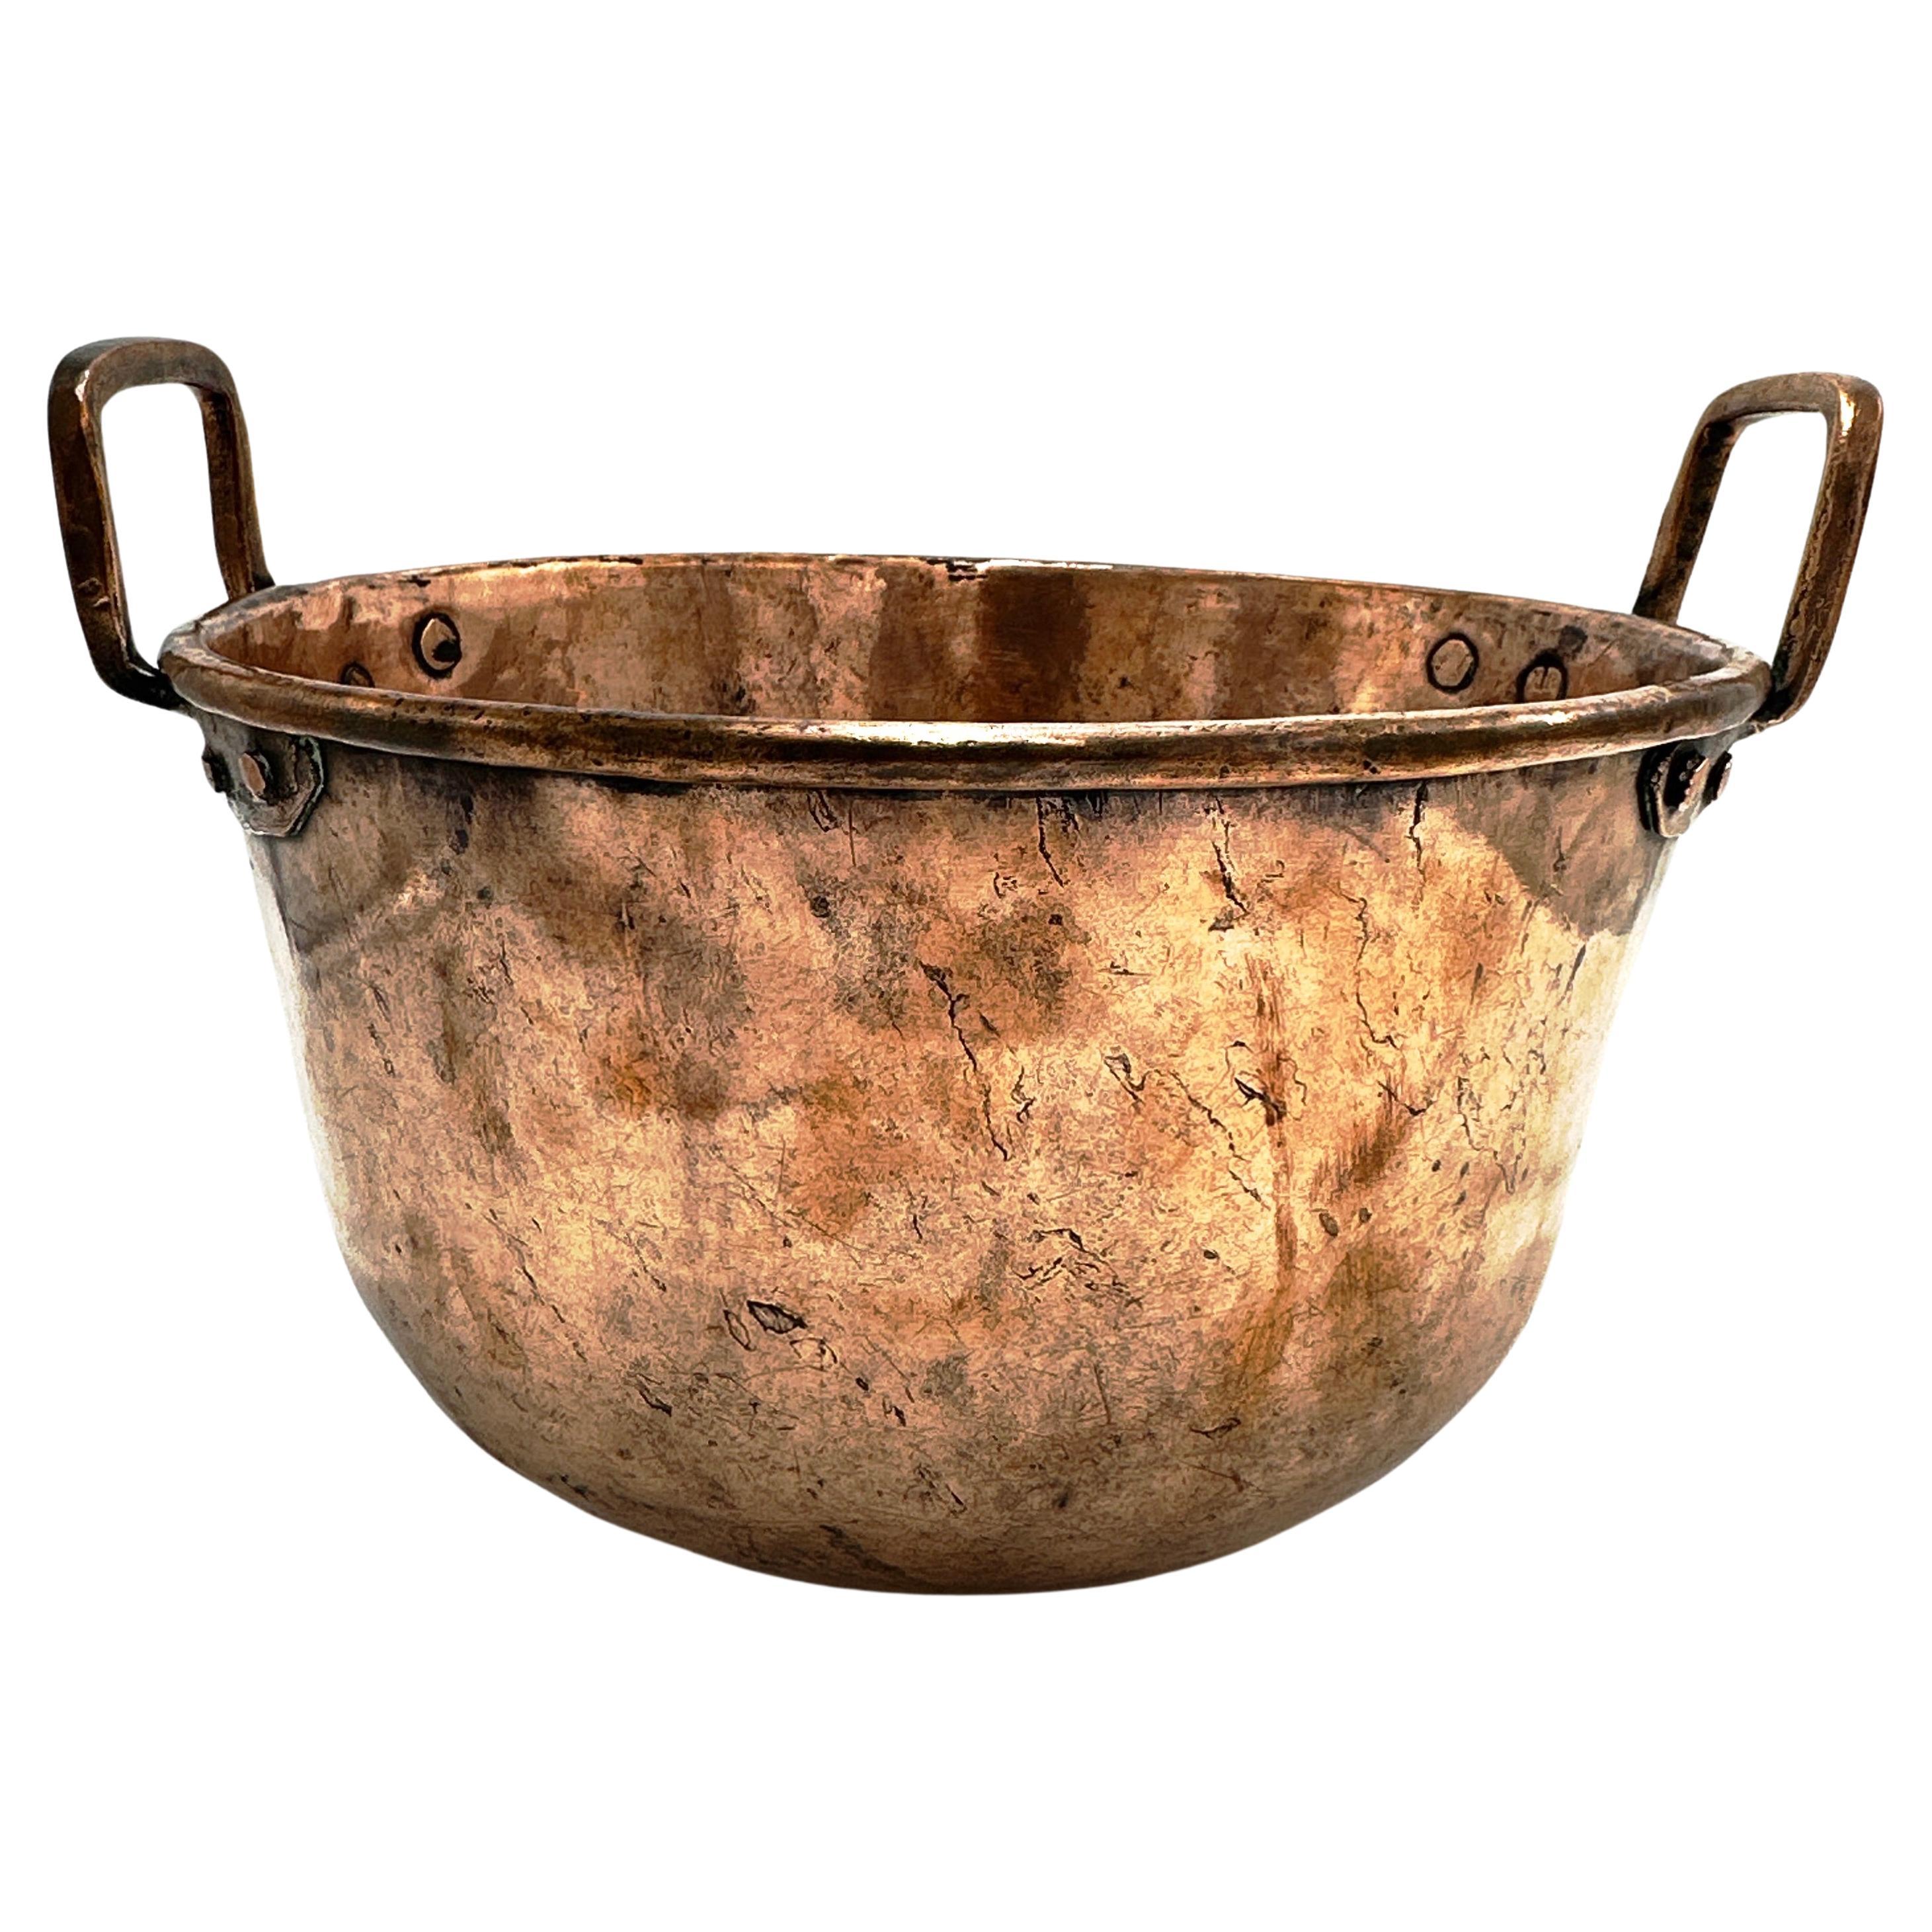 Mid-19th Century French Copper Jelly and Jam "Bassine a Confiture" Boiling Bowl For Sale